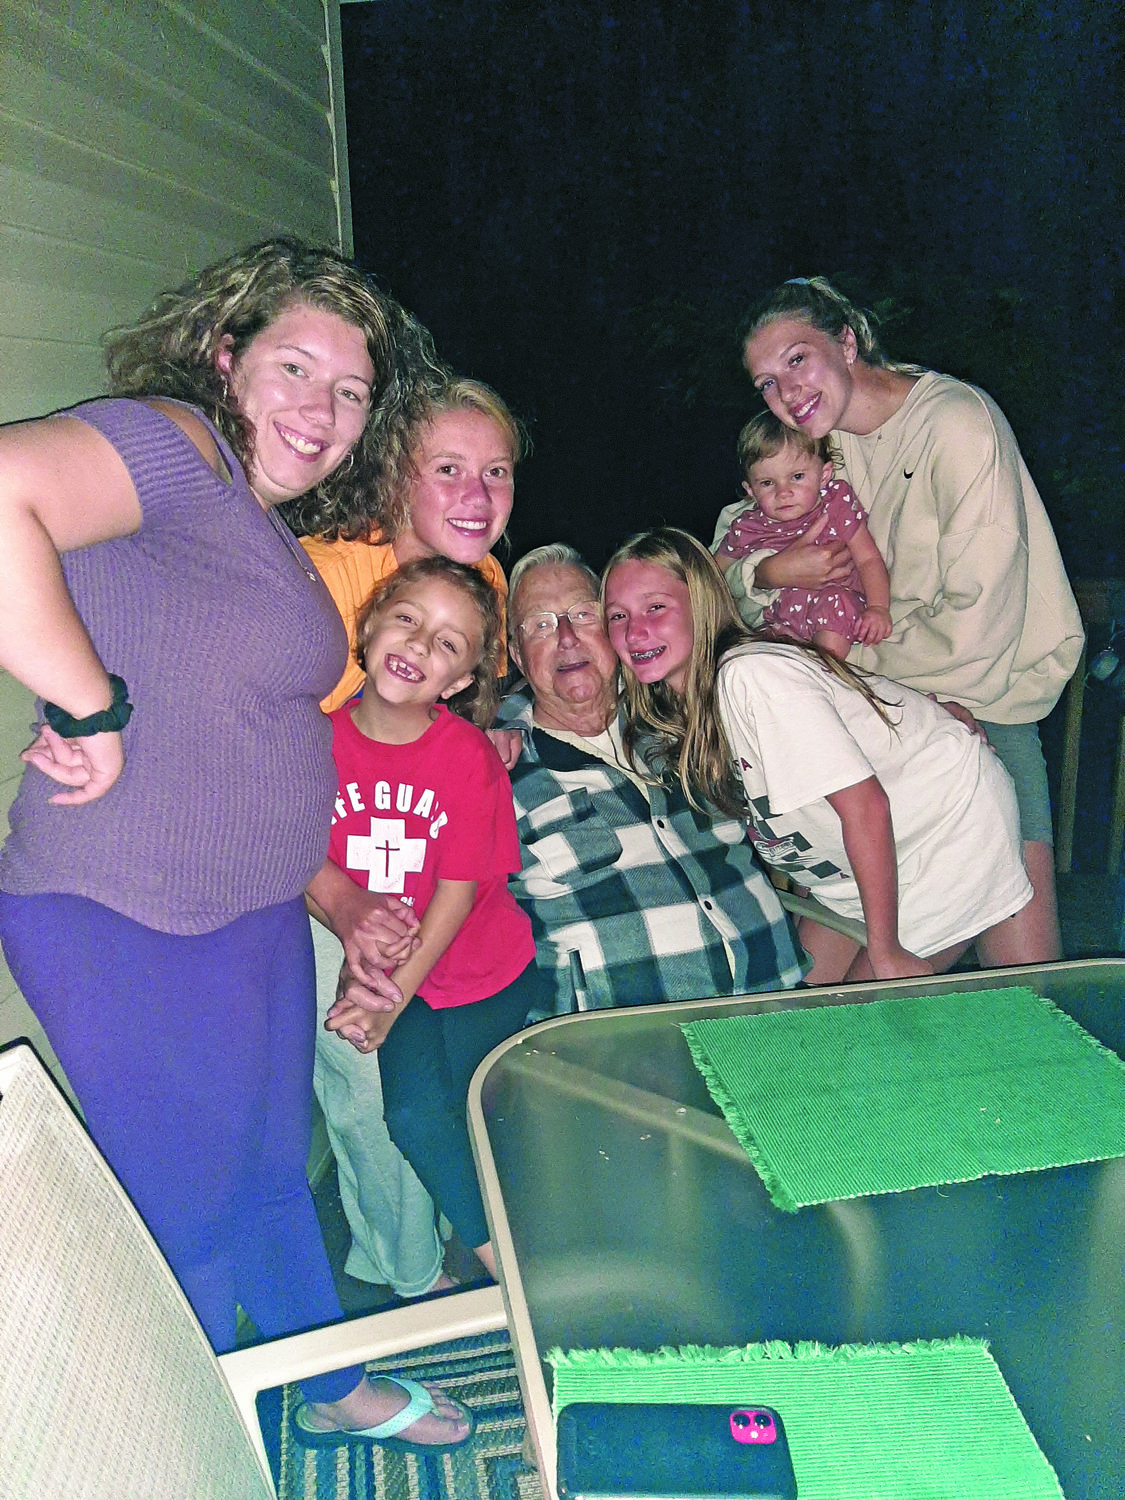 Ed Luecke with his granddaughters and great-granddaughters. From top left are Emily, Danae, Lilly, and Alyssa. From bottom left are Madison, Ed and Megan.